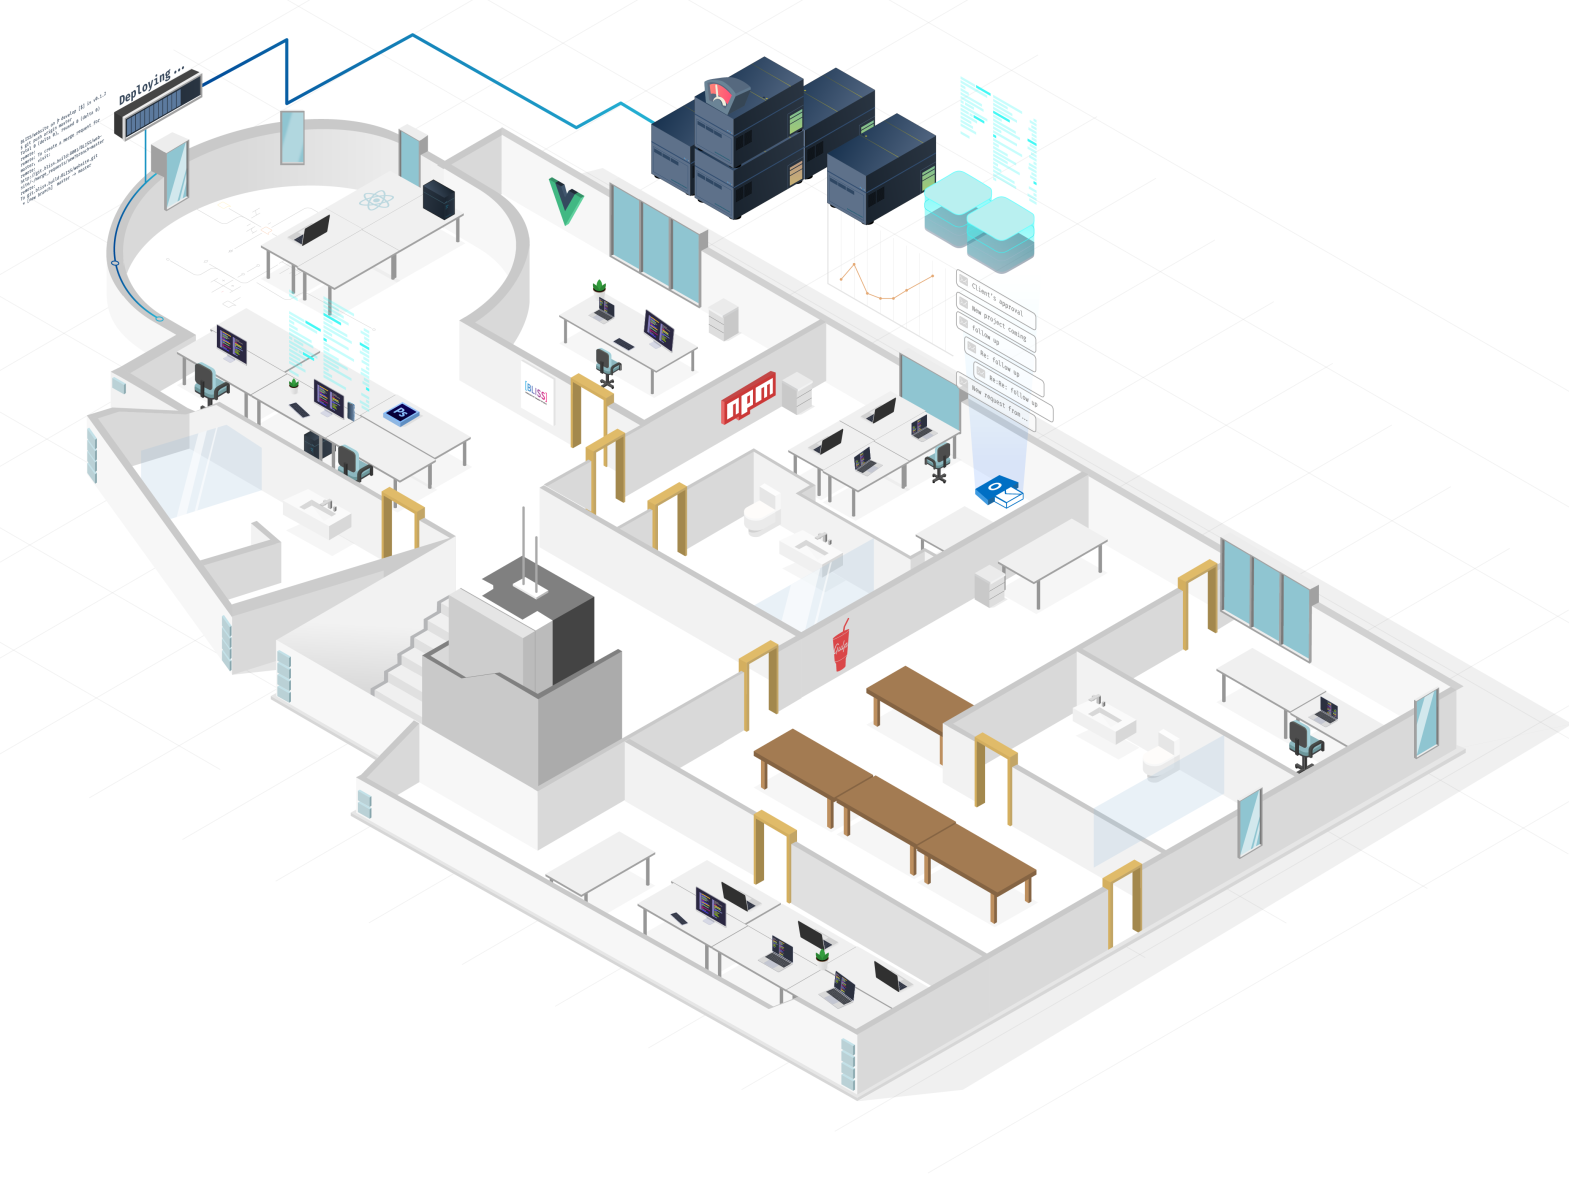 Office isometric by Richebois on Dribbble